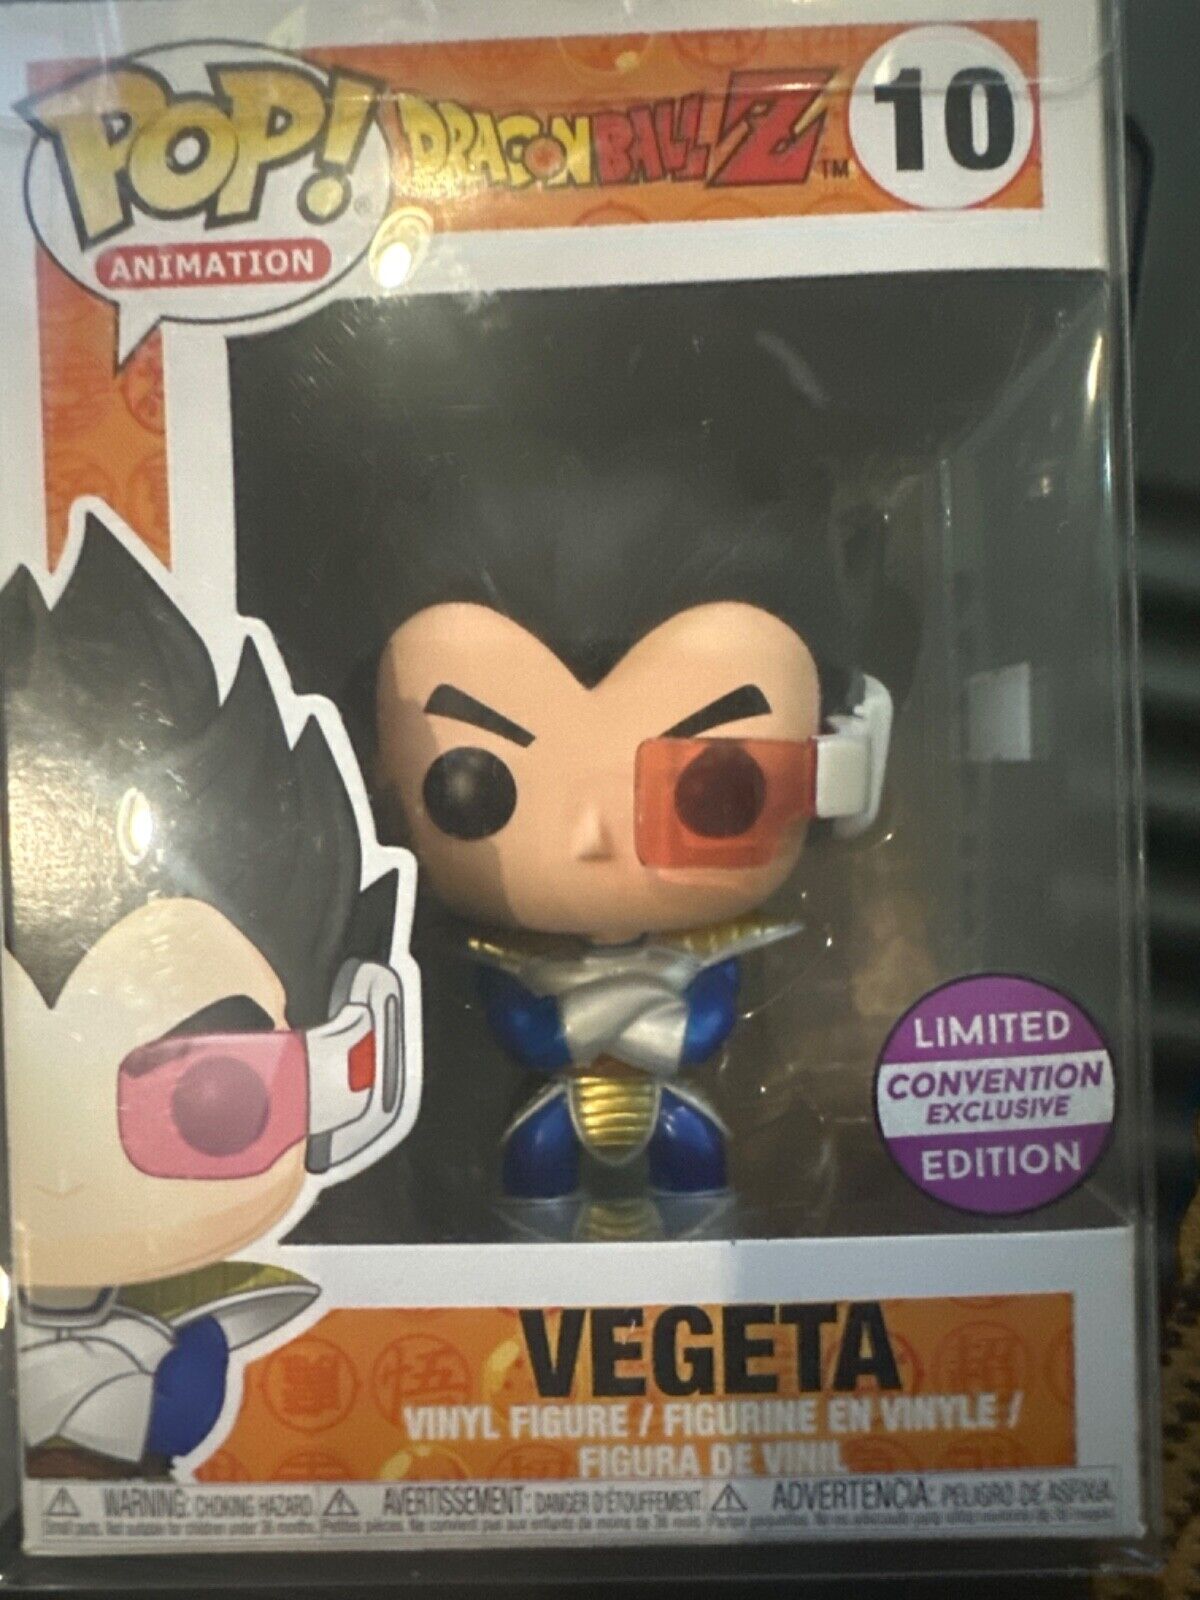 Funko Pop Dragon Ball Z Vegeta 10 Limited Edition Convention Exclusive